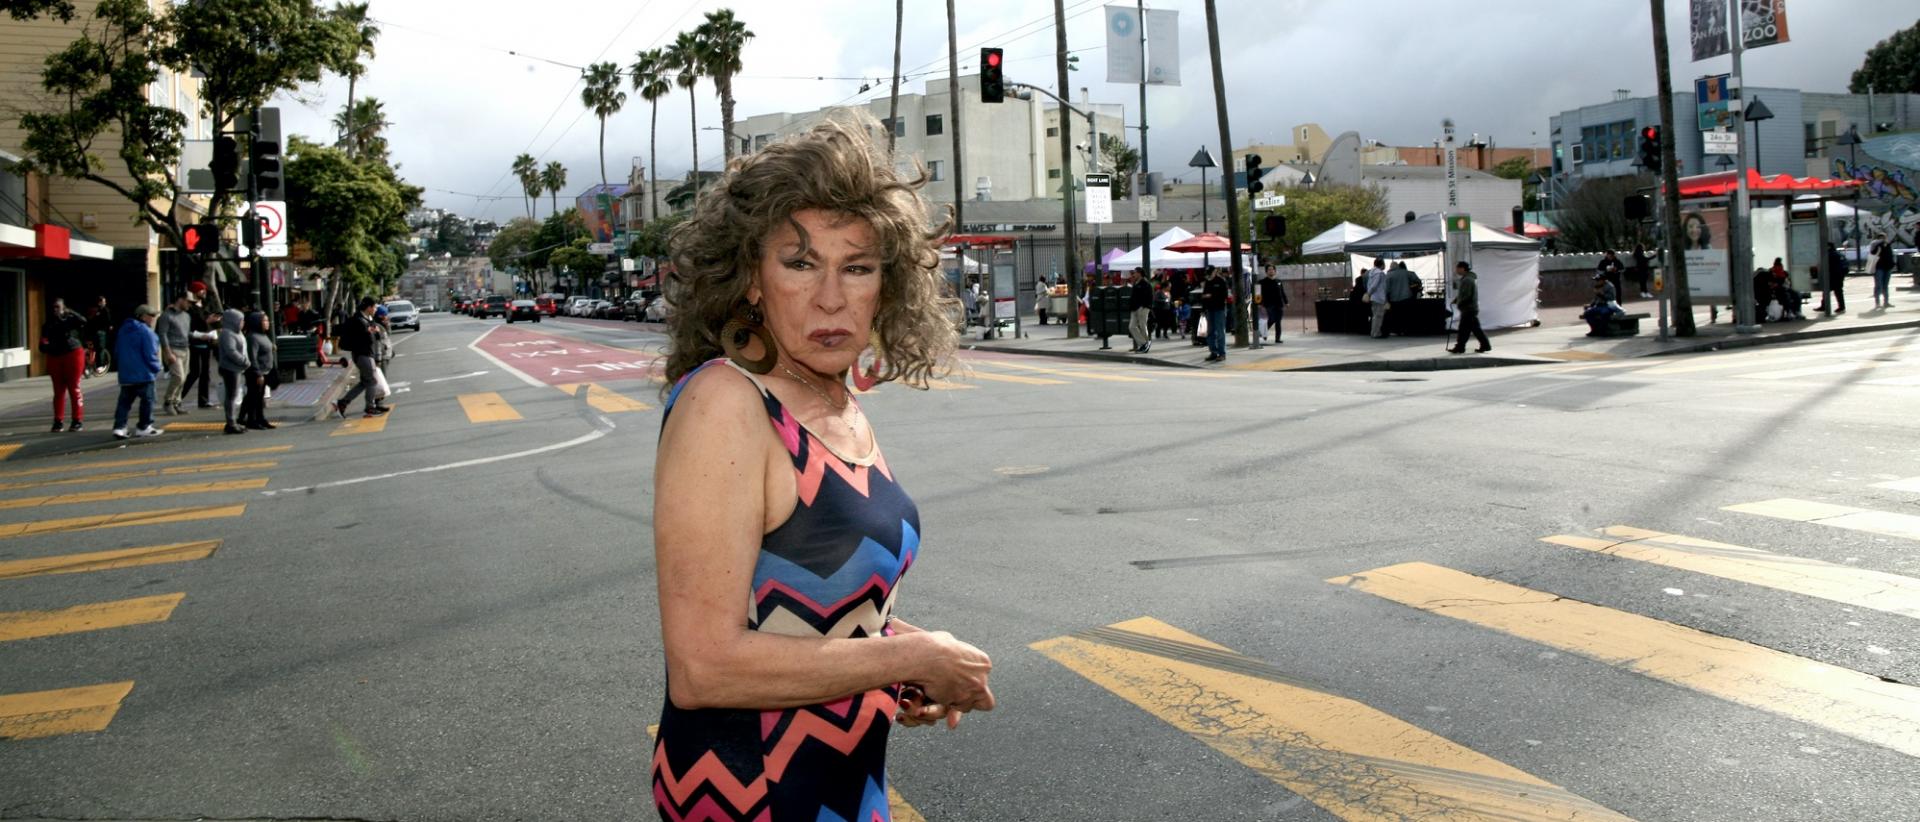 a photo of a person wearing a dress and standing at a road intersection in an american town